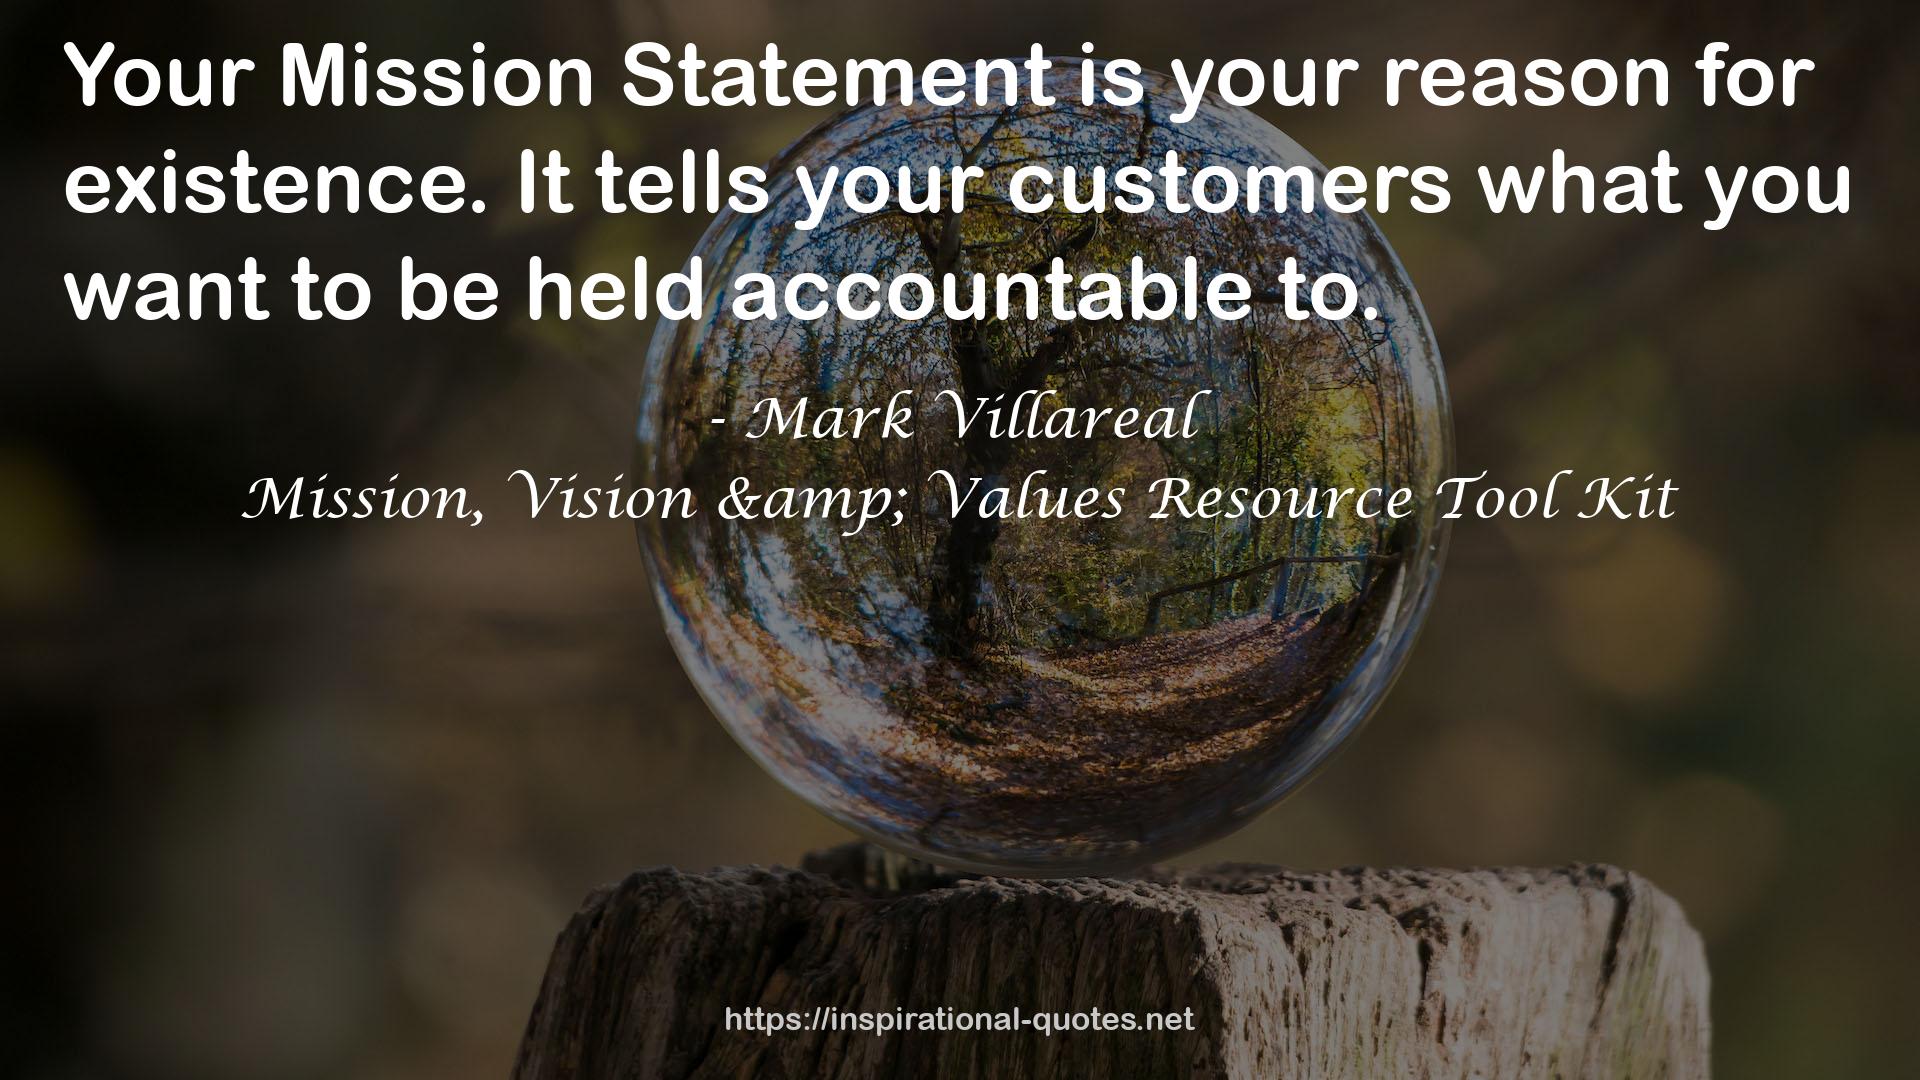 Mission, Vision & Values Resource Tool Kit QUOTES